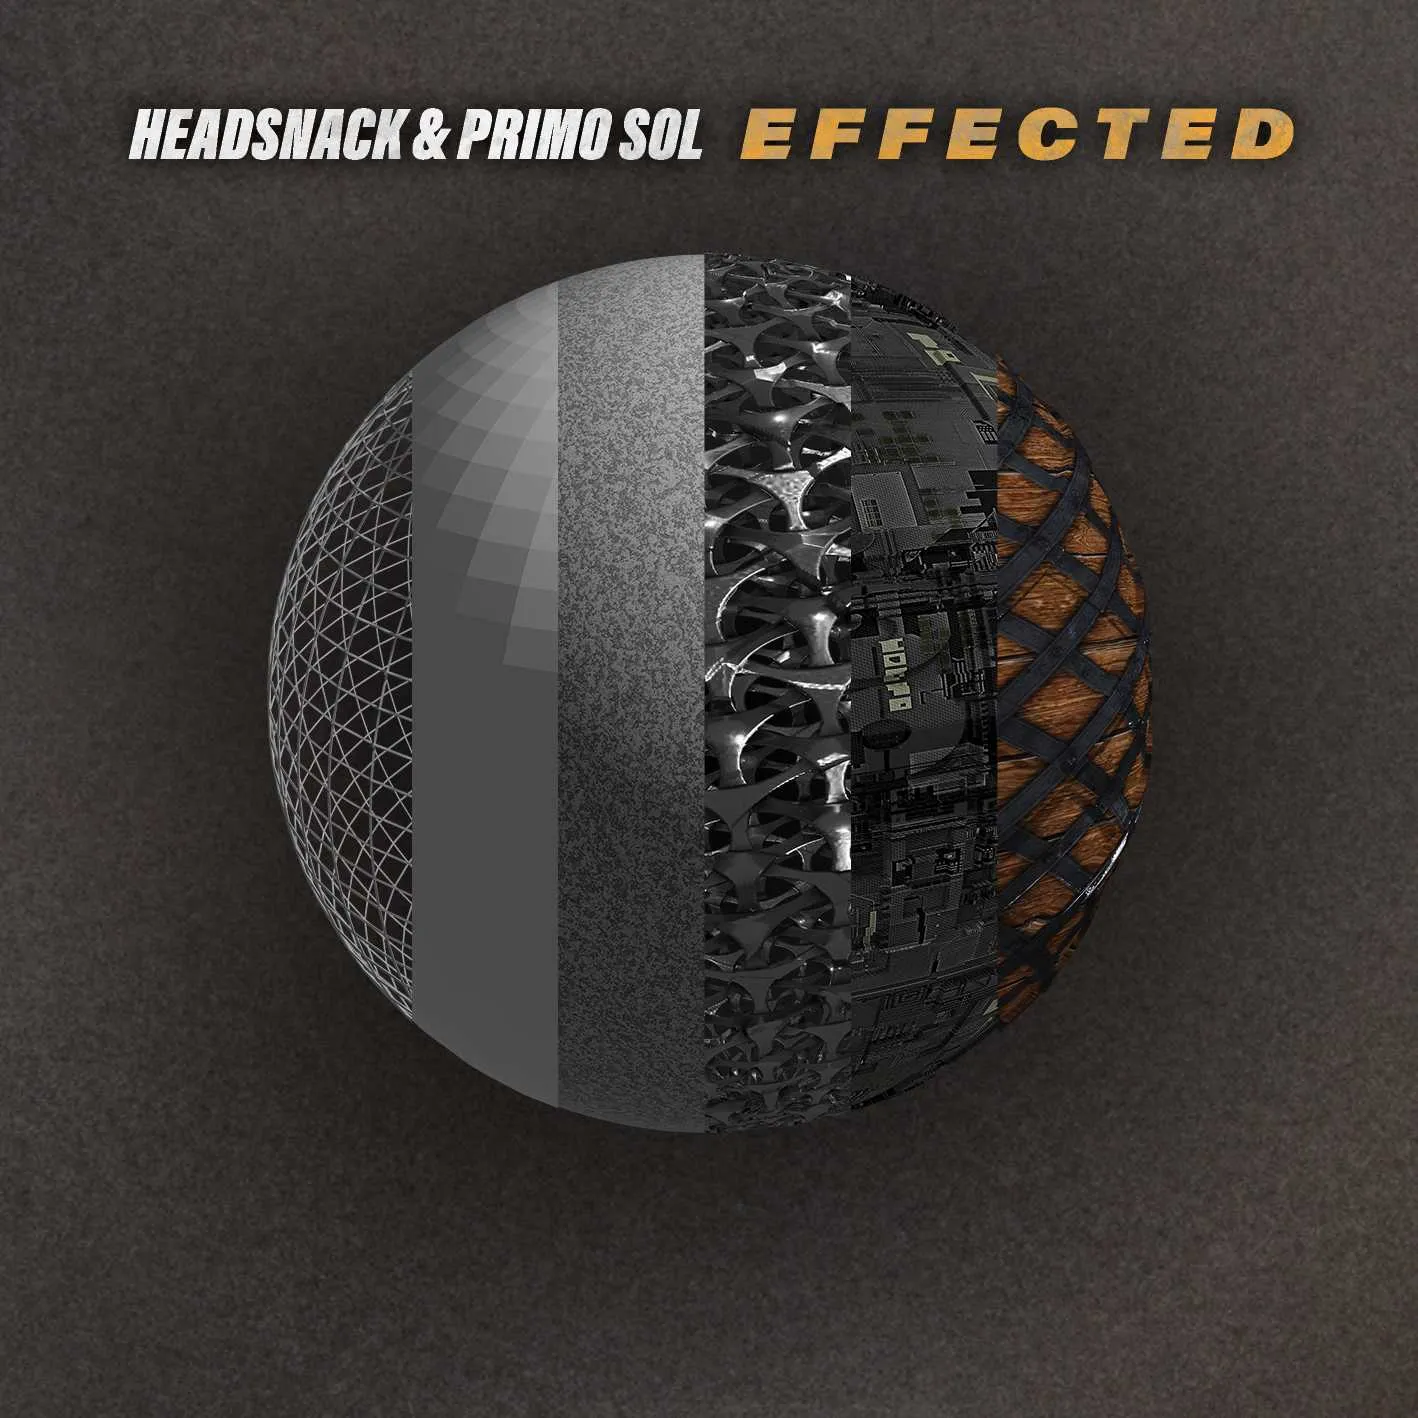 Album cover for “EFFECTED” by Headsnack &amp; Primo Sol